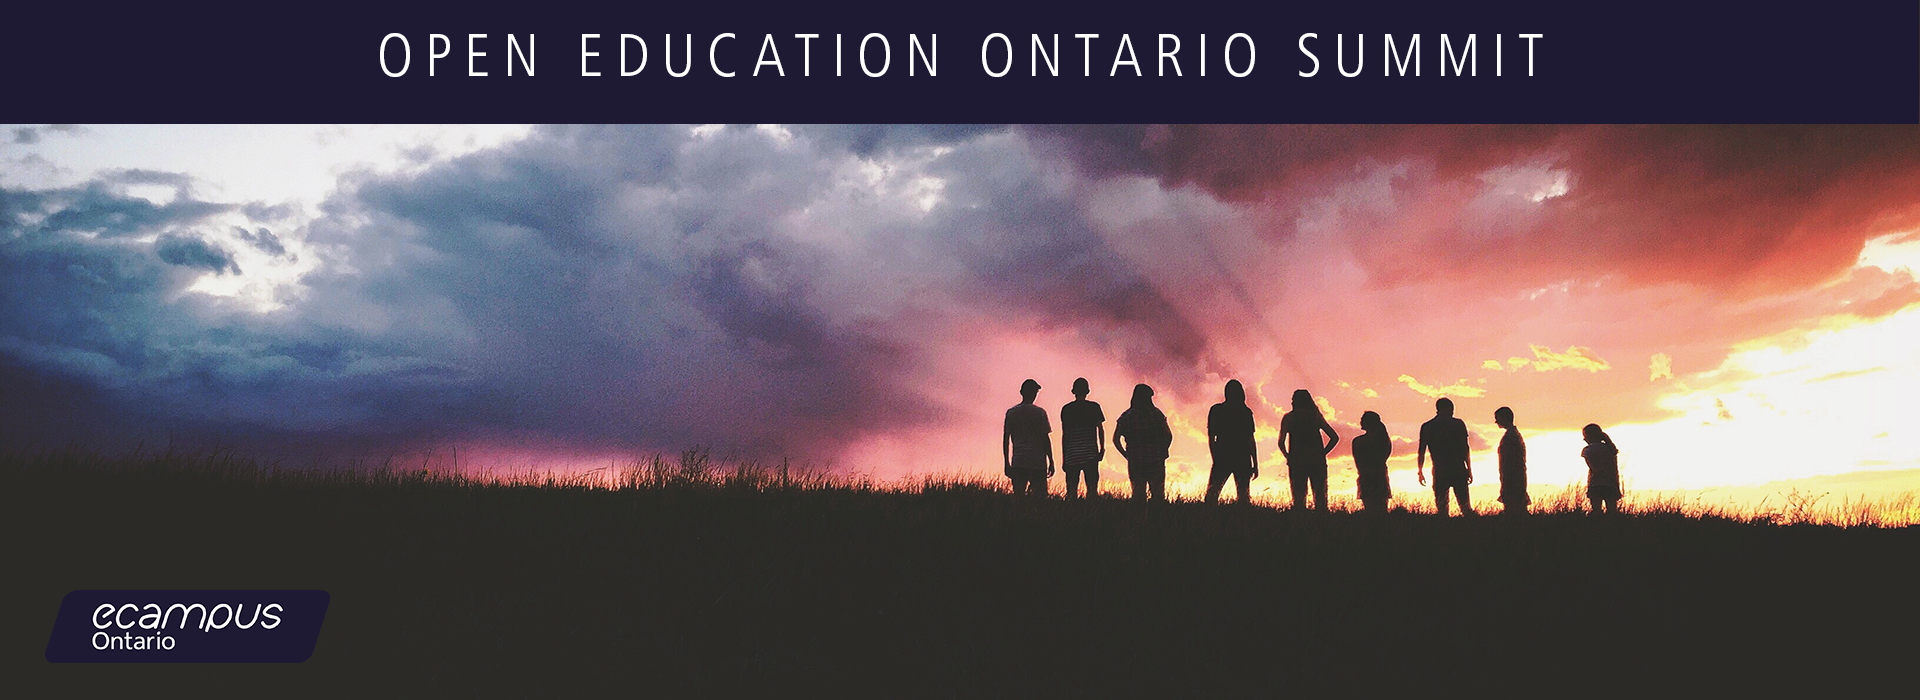 goup of people standing on a hill looking into the sunset with a caption of "open education ontario summit" presented by ecampus ontario